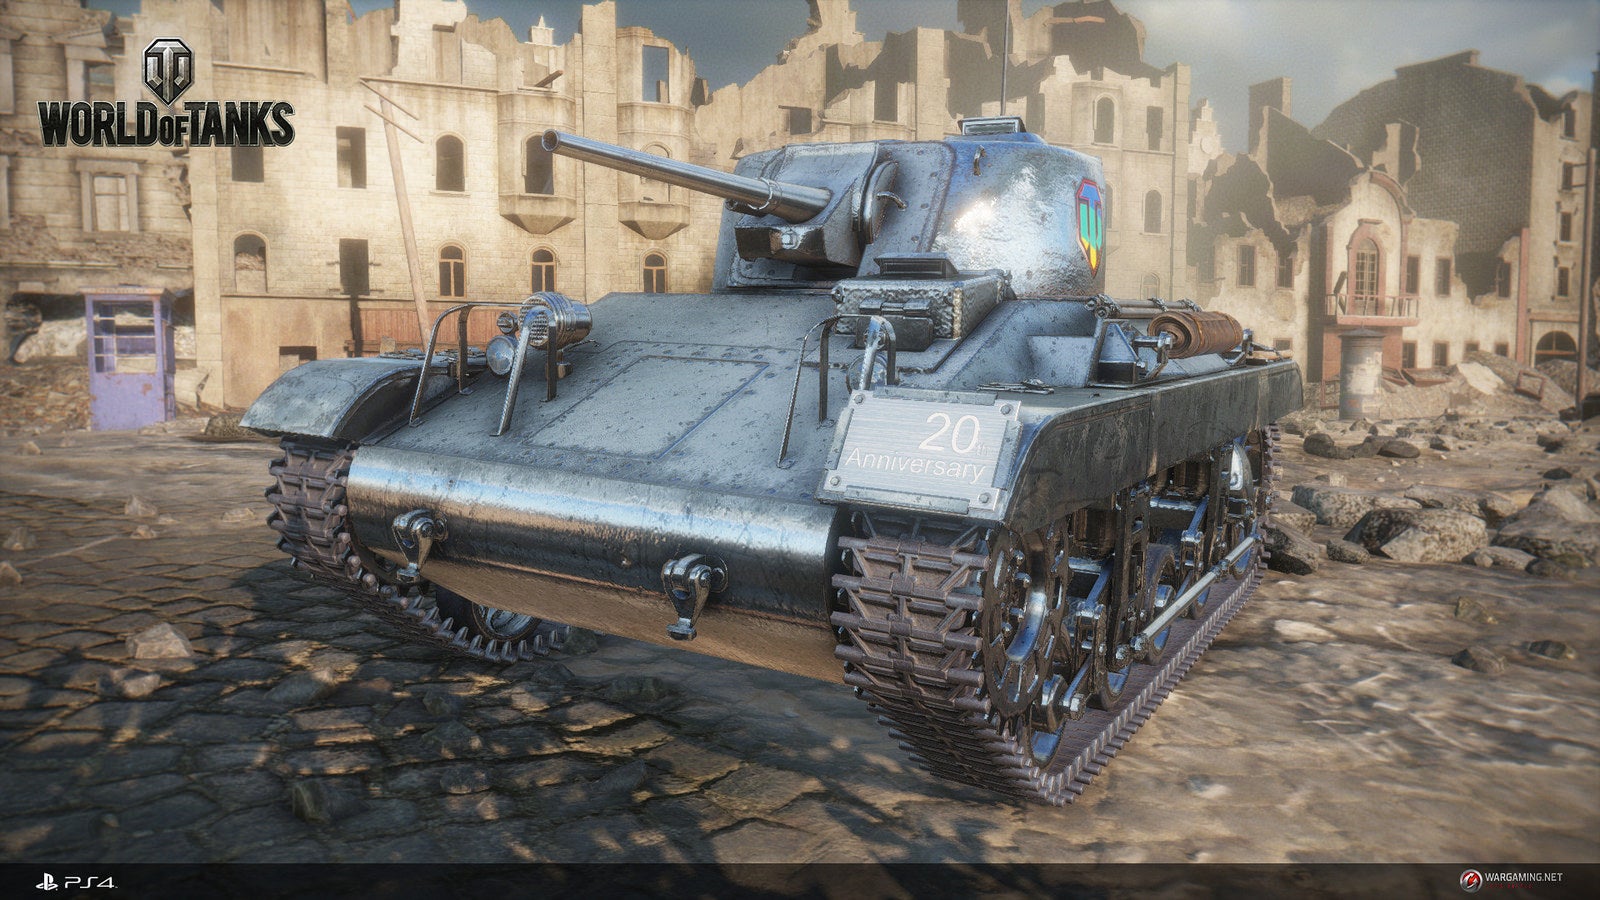 The tank games across all platforms | VG247